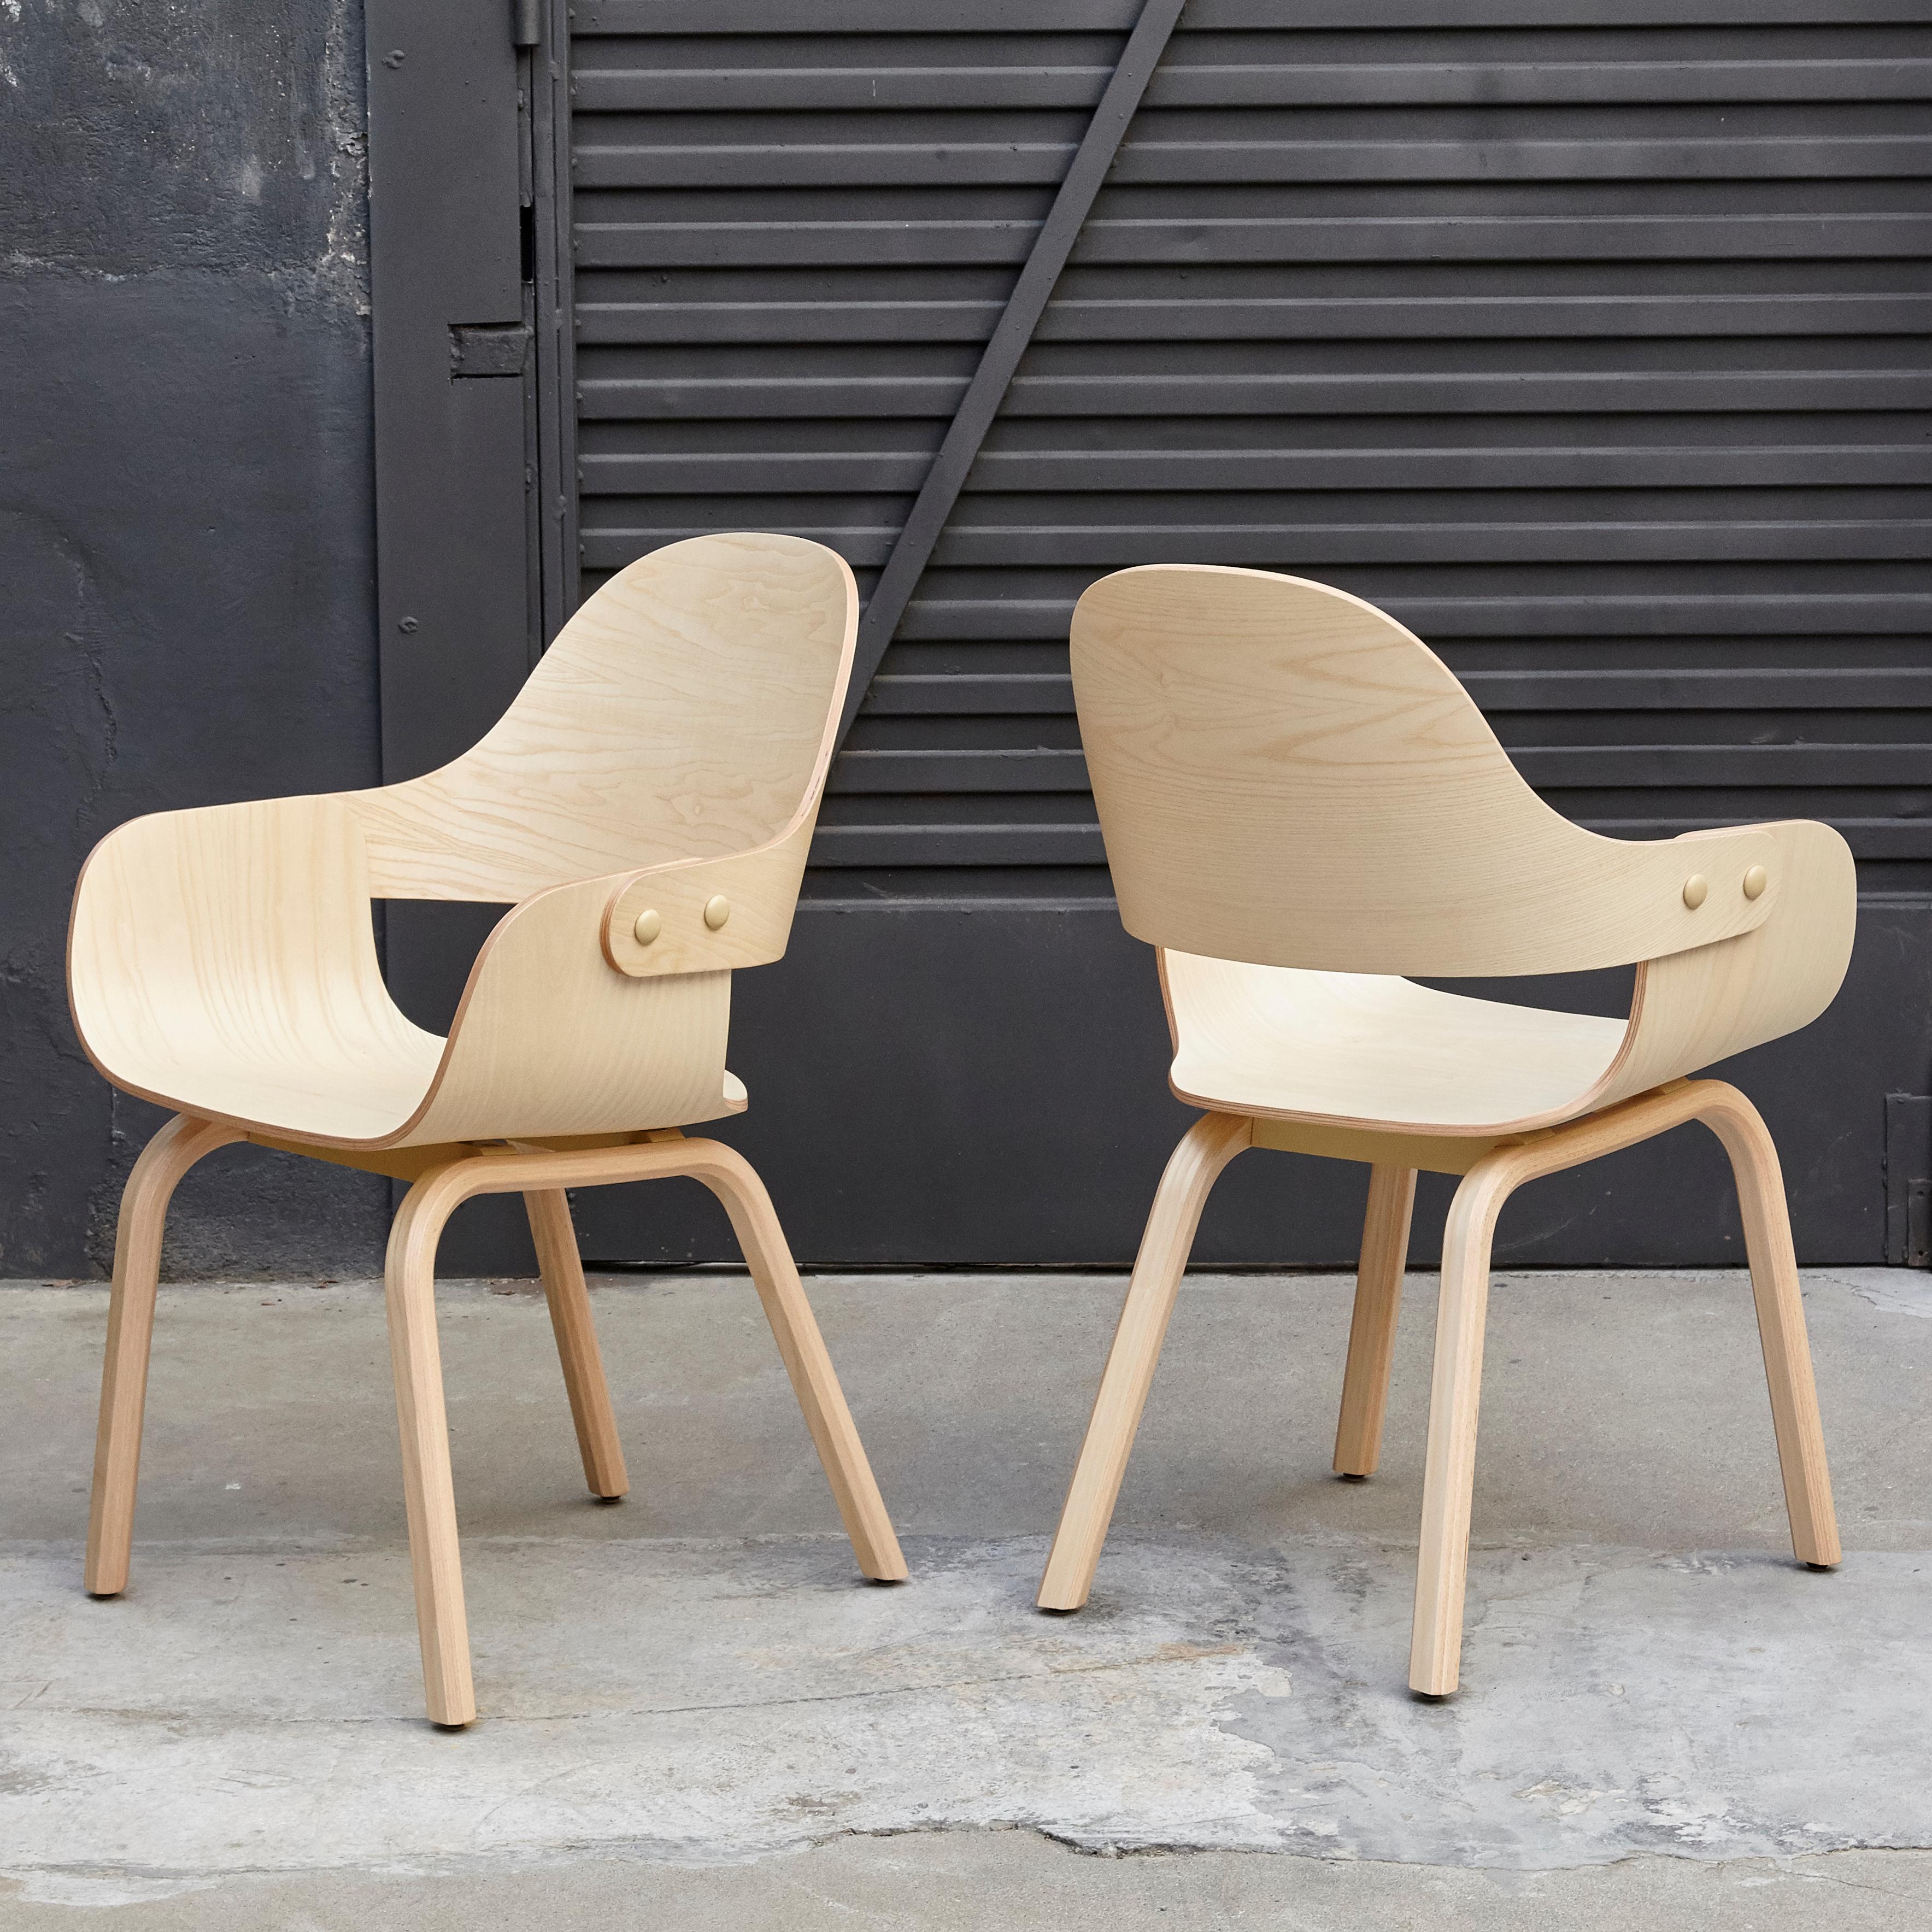 Modern Pair of Jaime Hayon, Contemporary, Wood Chair Showtime Nude by BD Barcelona